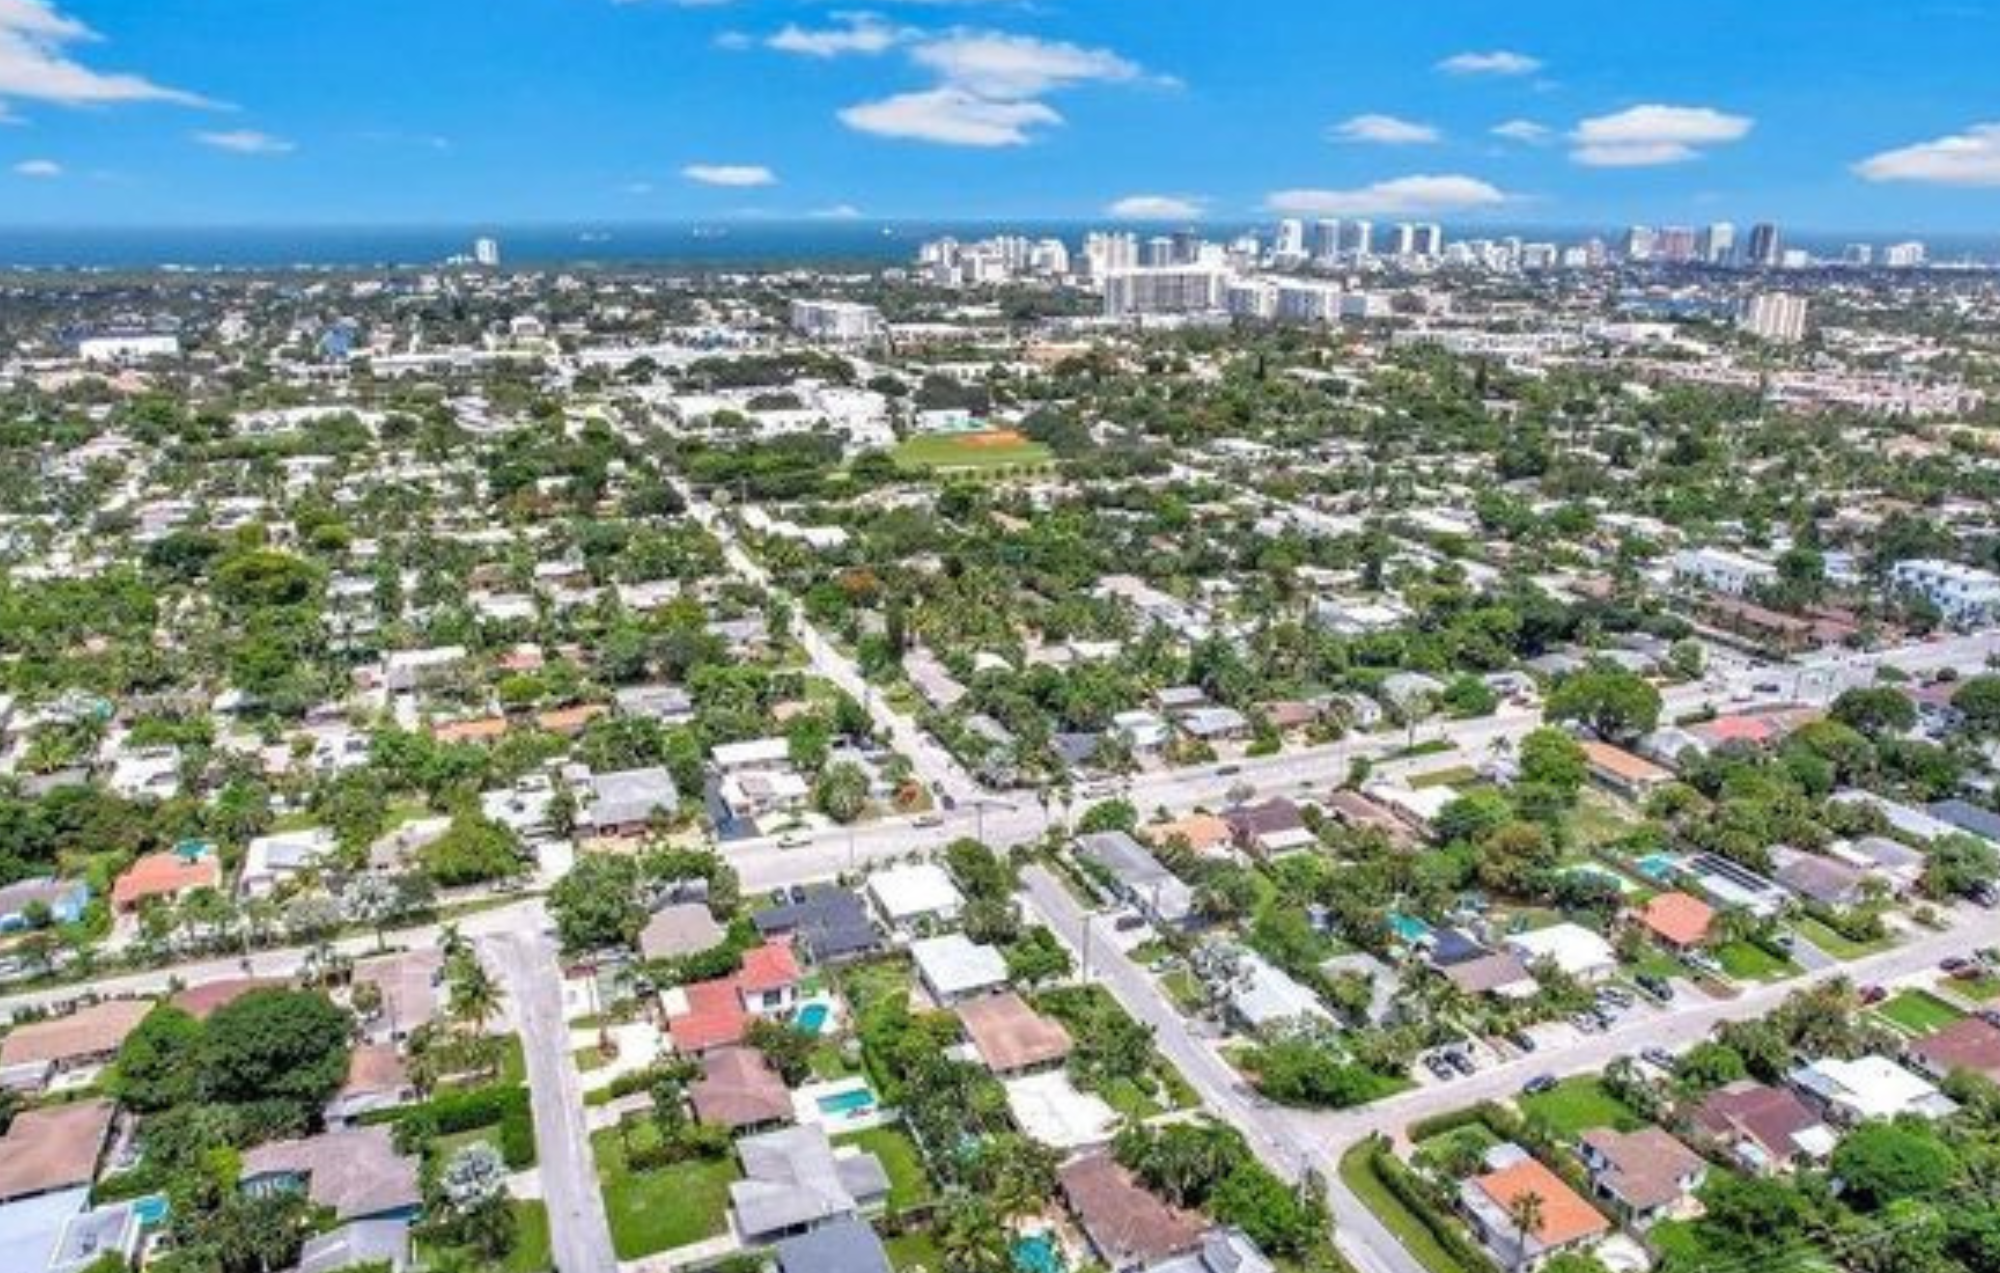 https://realtorbobsells.com/search/#status=active&sold_days=180&pstatus=1%2C11&ls_conversion=acres&location_search_field=Poinsettia%20Heights%2C%20Fort%20Lauderdale%2C%20FL&drive_time=09%3A00&drive_duration=15&drive_avoid_ferry=1&drive_departure=1&ss_locale=en-US&ss_description=Poinsettia%20Heights%2C%20Fort%20Lauderdale%2C%20FL&ss_email_freq=40&ss_send_zero_result=1&bounds_north=26.189167486497222&bounds_east=-80.11280195408548&bounds_south=26.111197729606197&bounds_west=-80.13795034580912&center_lat=26.1472756&center_lon=-80.1233175&center_lat_pan=26.1501891199099&center_lon_pan=-80.1253761499473&geotype=Neighborhood&user_lat=26.1472756&user_lon=-80.1233175&pgsize=20&startidx=0&zoom=14&sort_by=1&company_uuid=4059187&commute=0&buffer_miles=0.25&geospatial=true&agent_uuid=c8693e92-6345-48cd-ae45-dc53c20f791f&ptype=1%2C2%2C3%2C4%2C5%2C7%2C9&searchType=criteria&omit_hidden=true&ex_pend=true&currency=USD